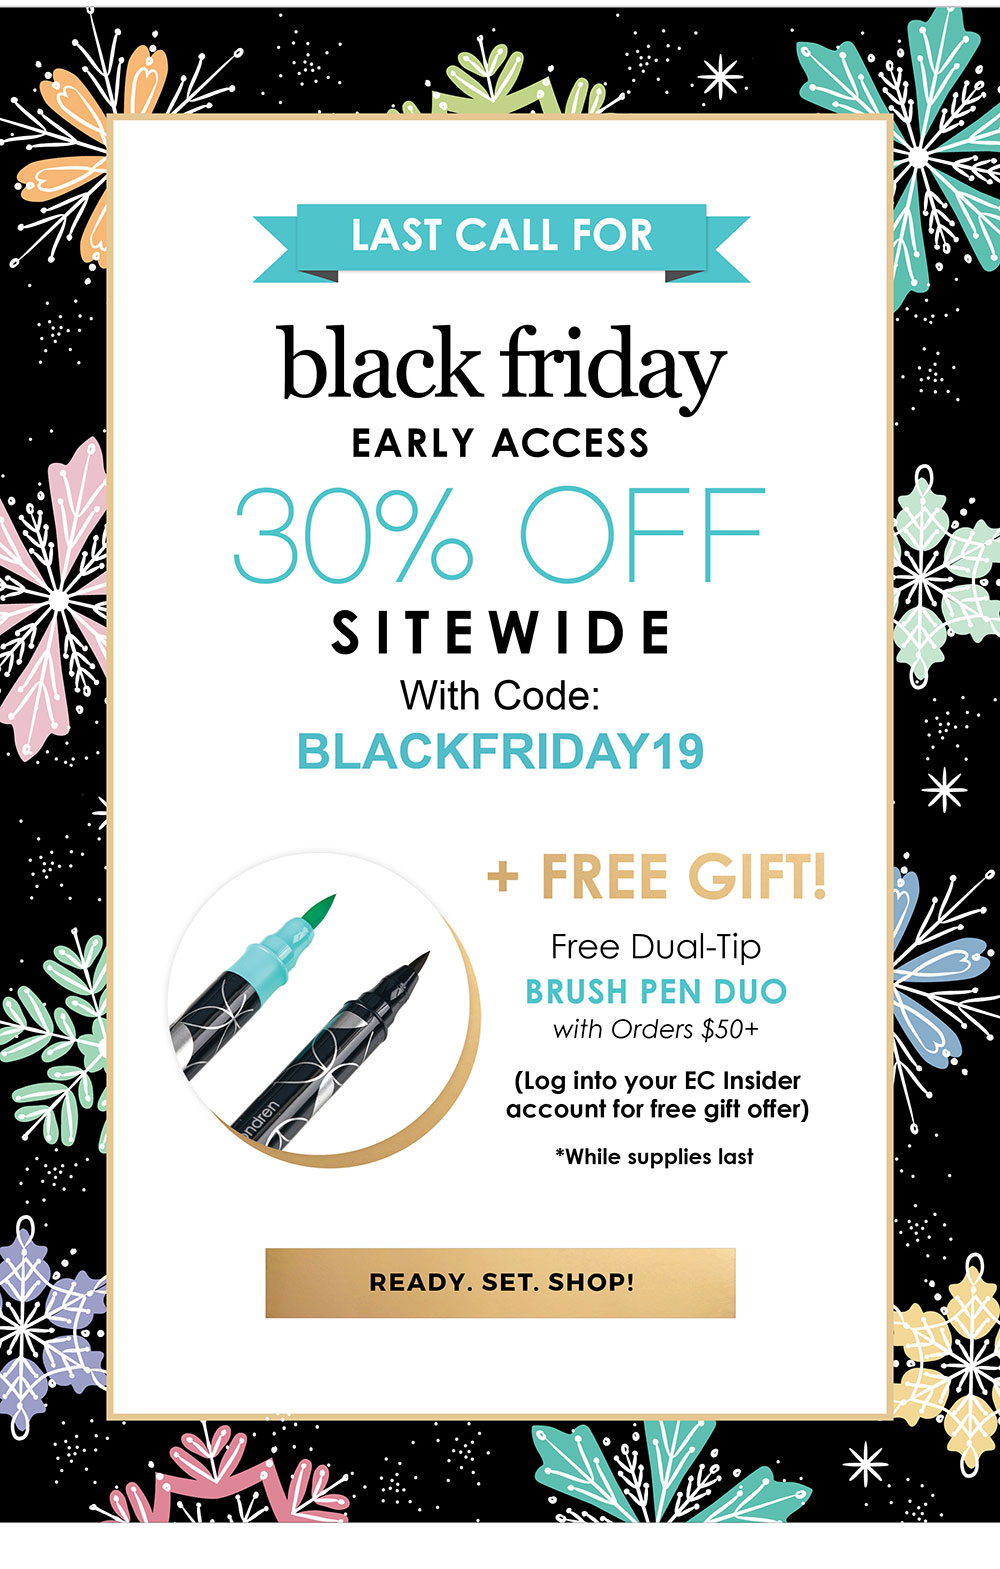 Last Call for Black Friday Early Access with code BLACKFRIDAY19 >